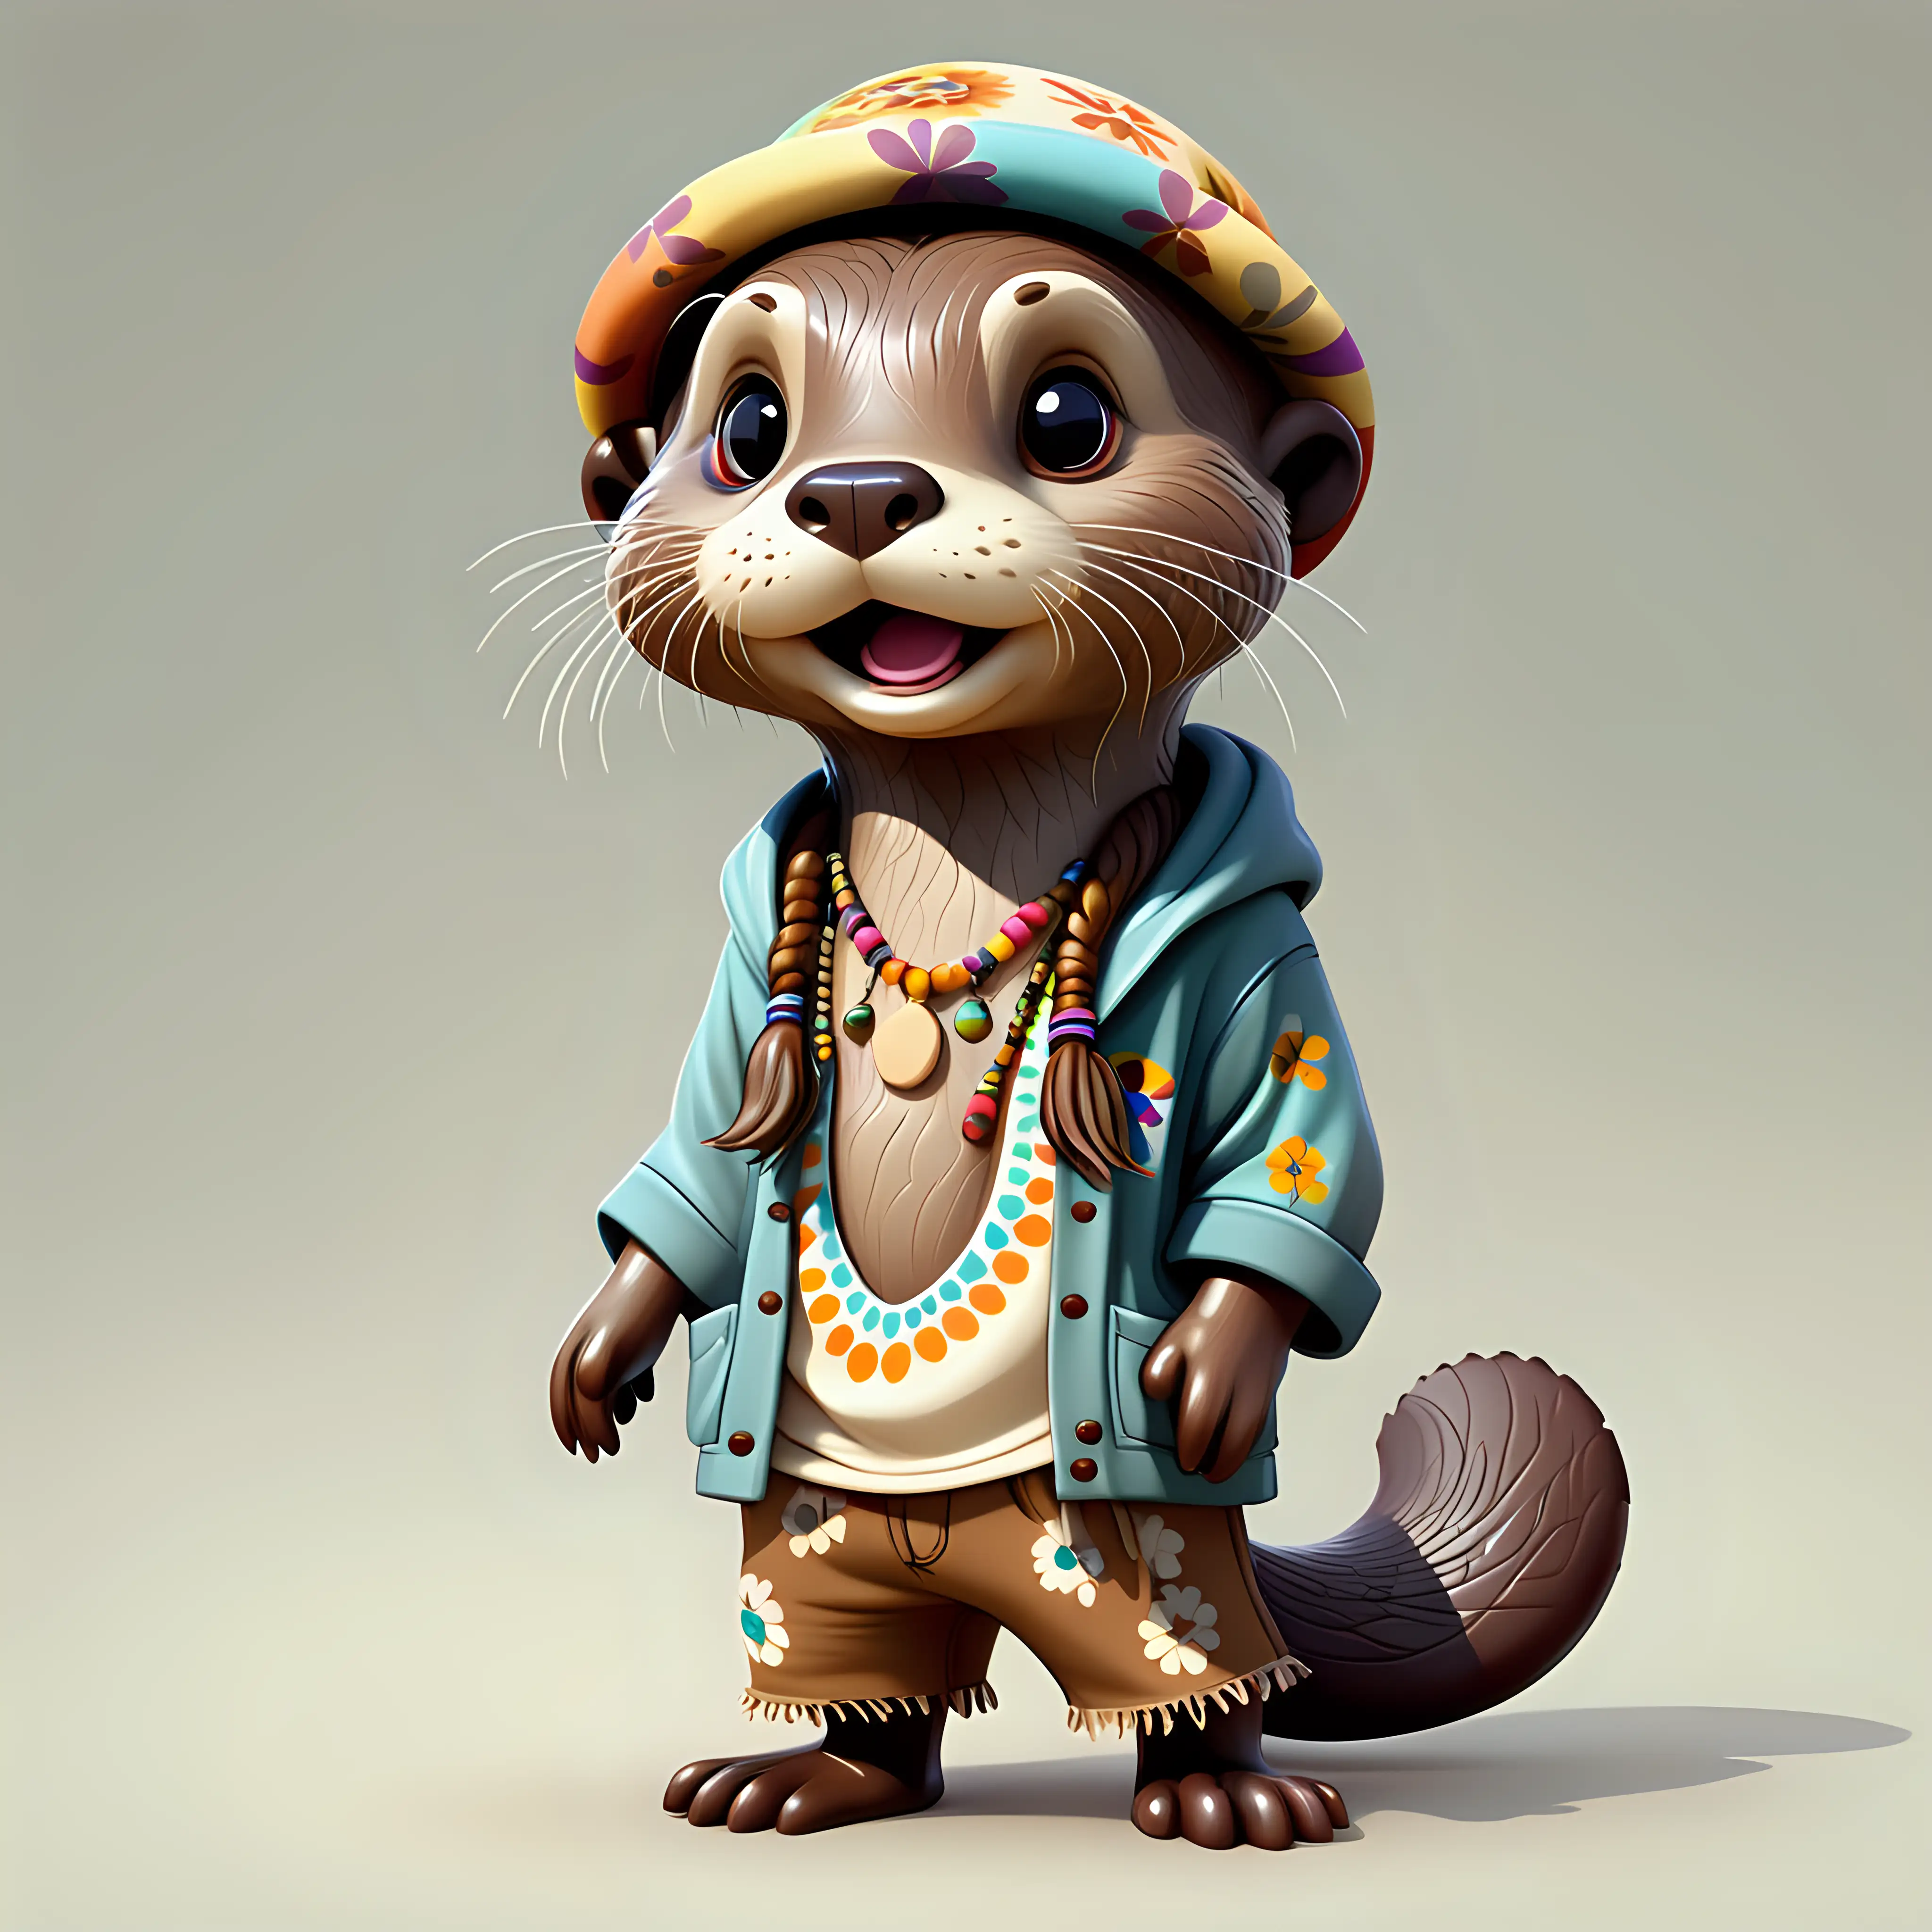 Adorable Cartoon Otter Wearing Hippie Clothes